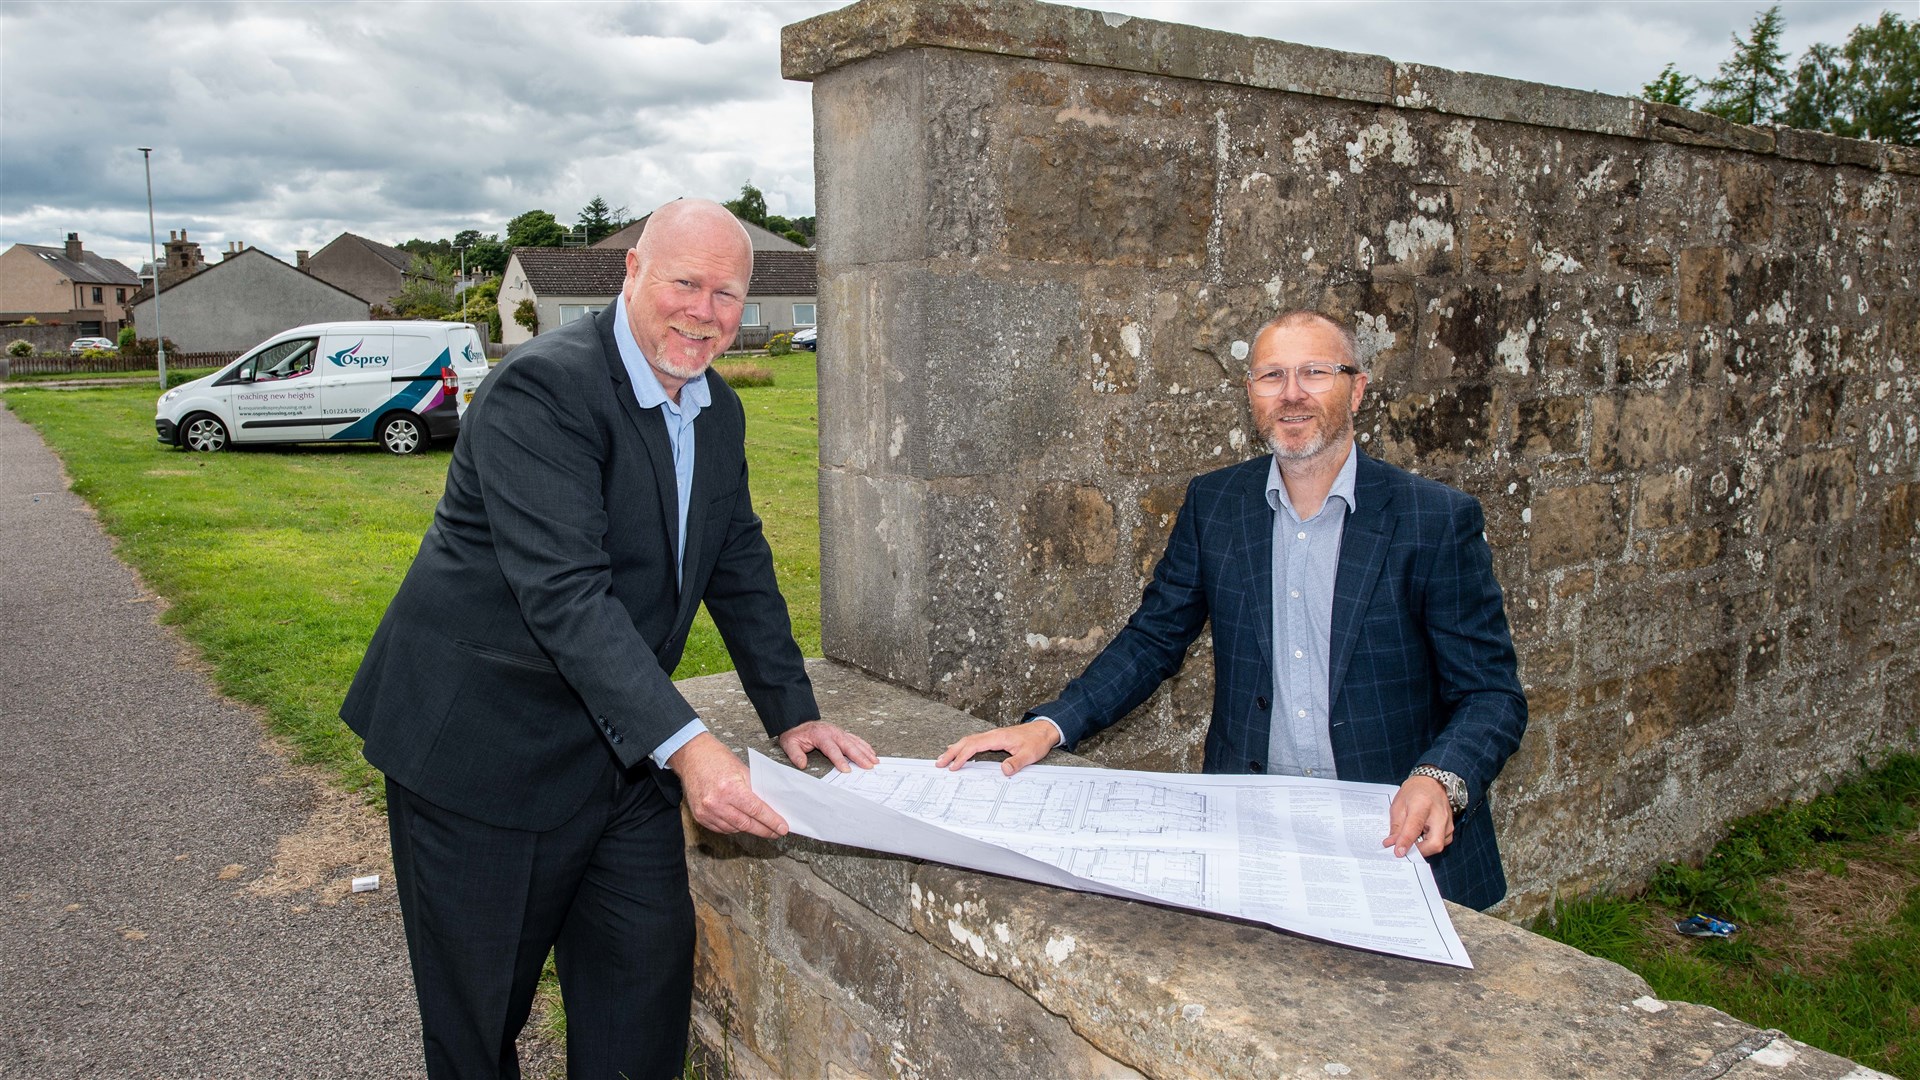 Allan Liddle (left), development officer at Osprey Housing Group, and John Main, managing director of Morlich Homes, looking over plans for the Elgin development on site.